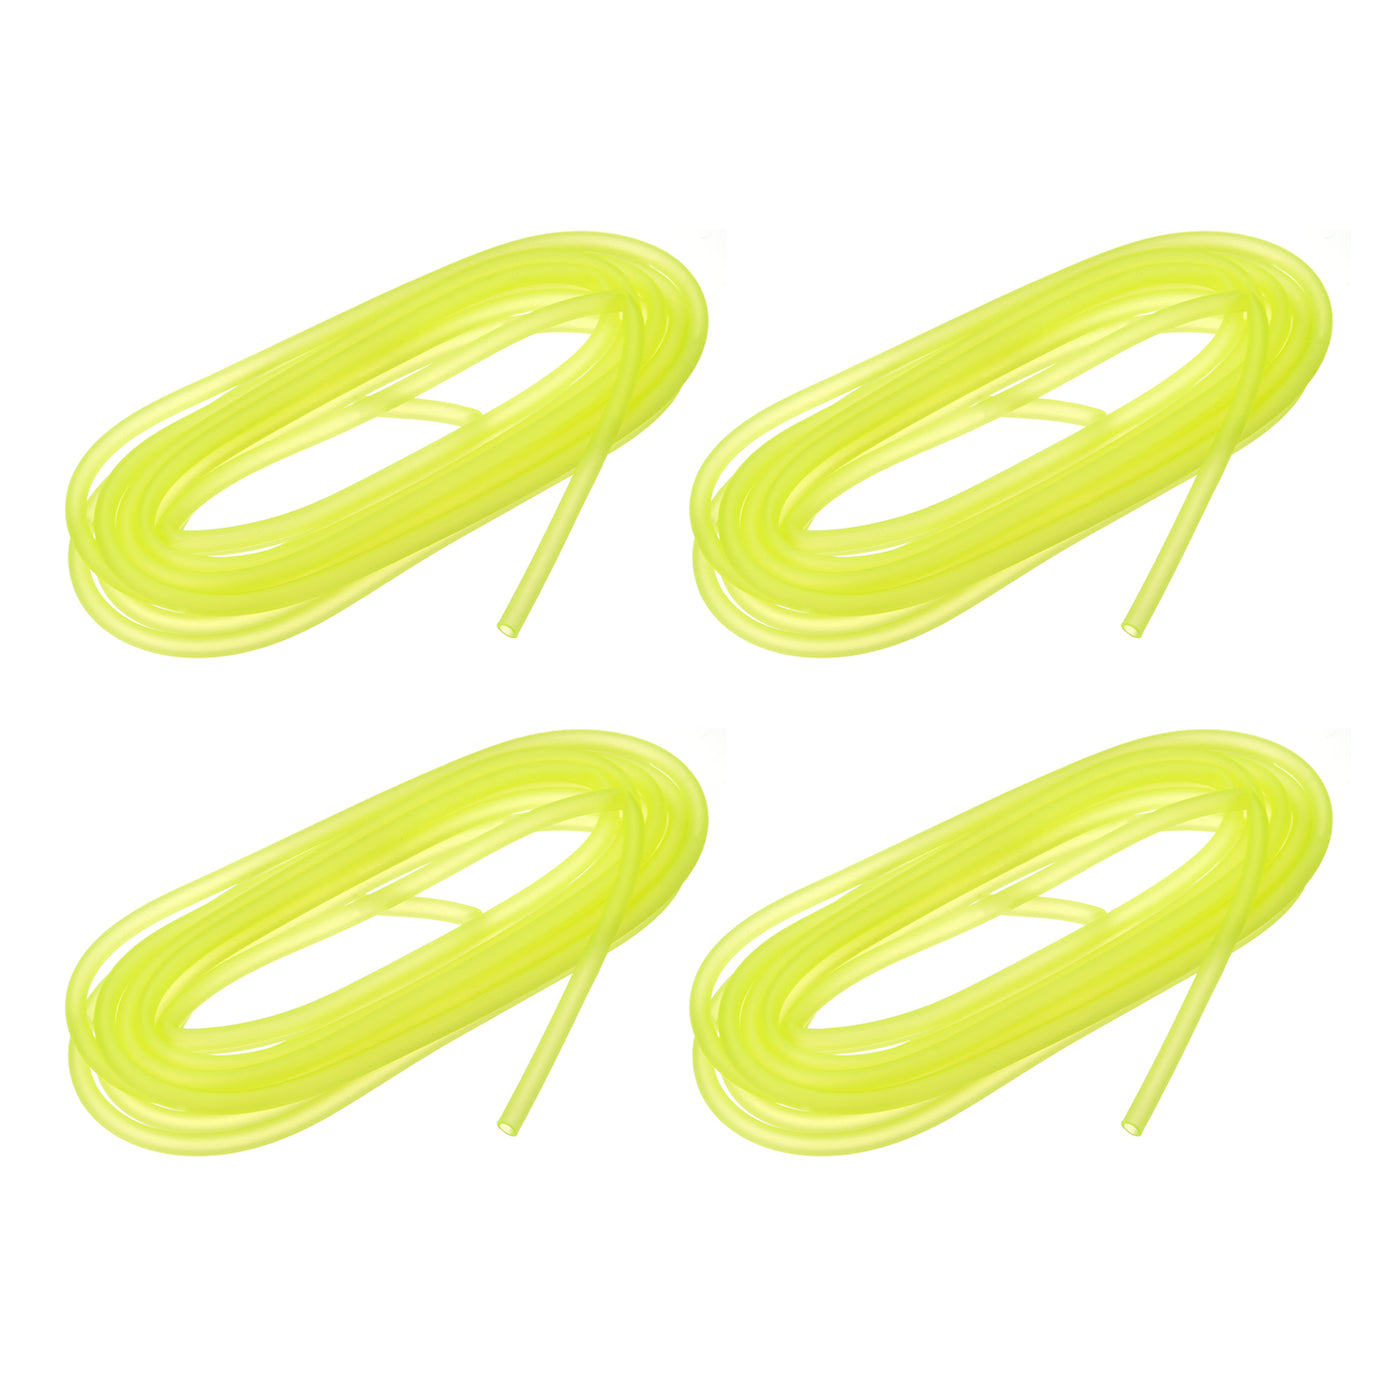 uxcell Uxcell Silicone Tubing 5/32" ID, 15/64" OD 4Pcs 13.12 Ft for Pump Transfer, Yellow